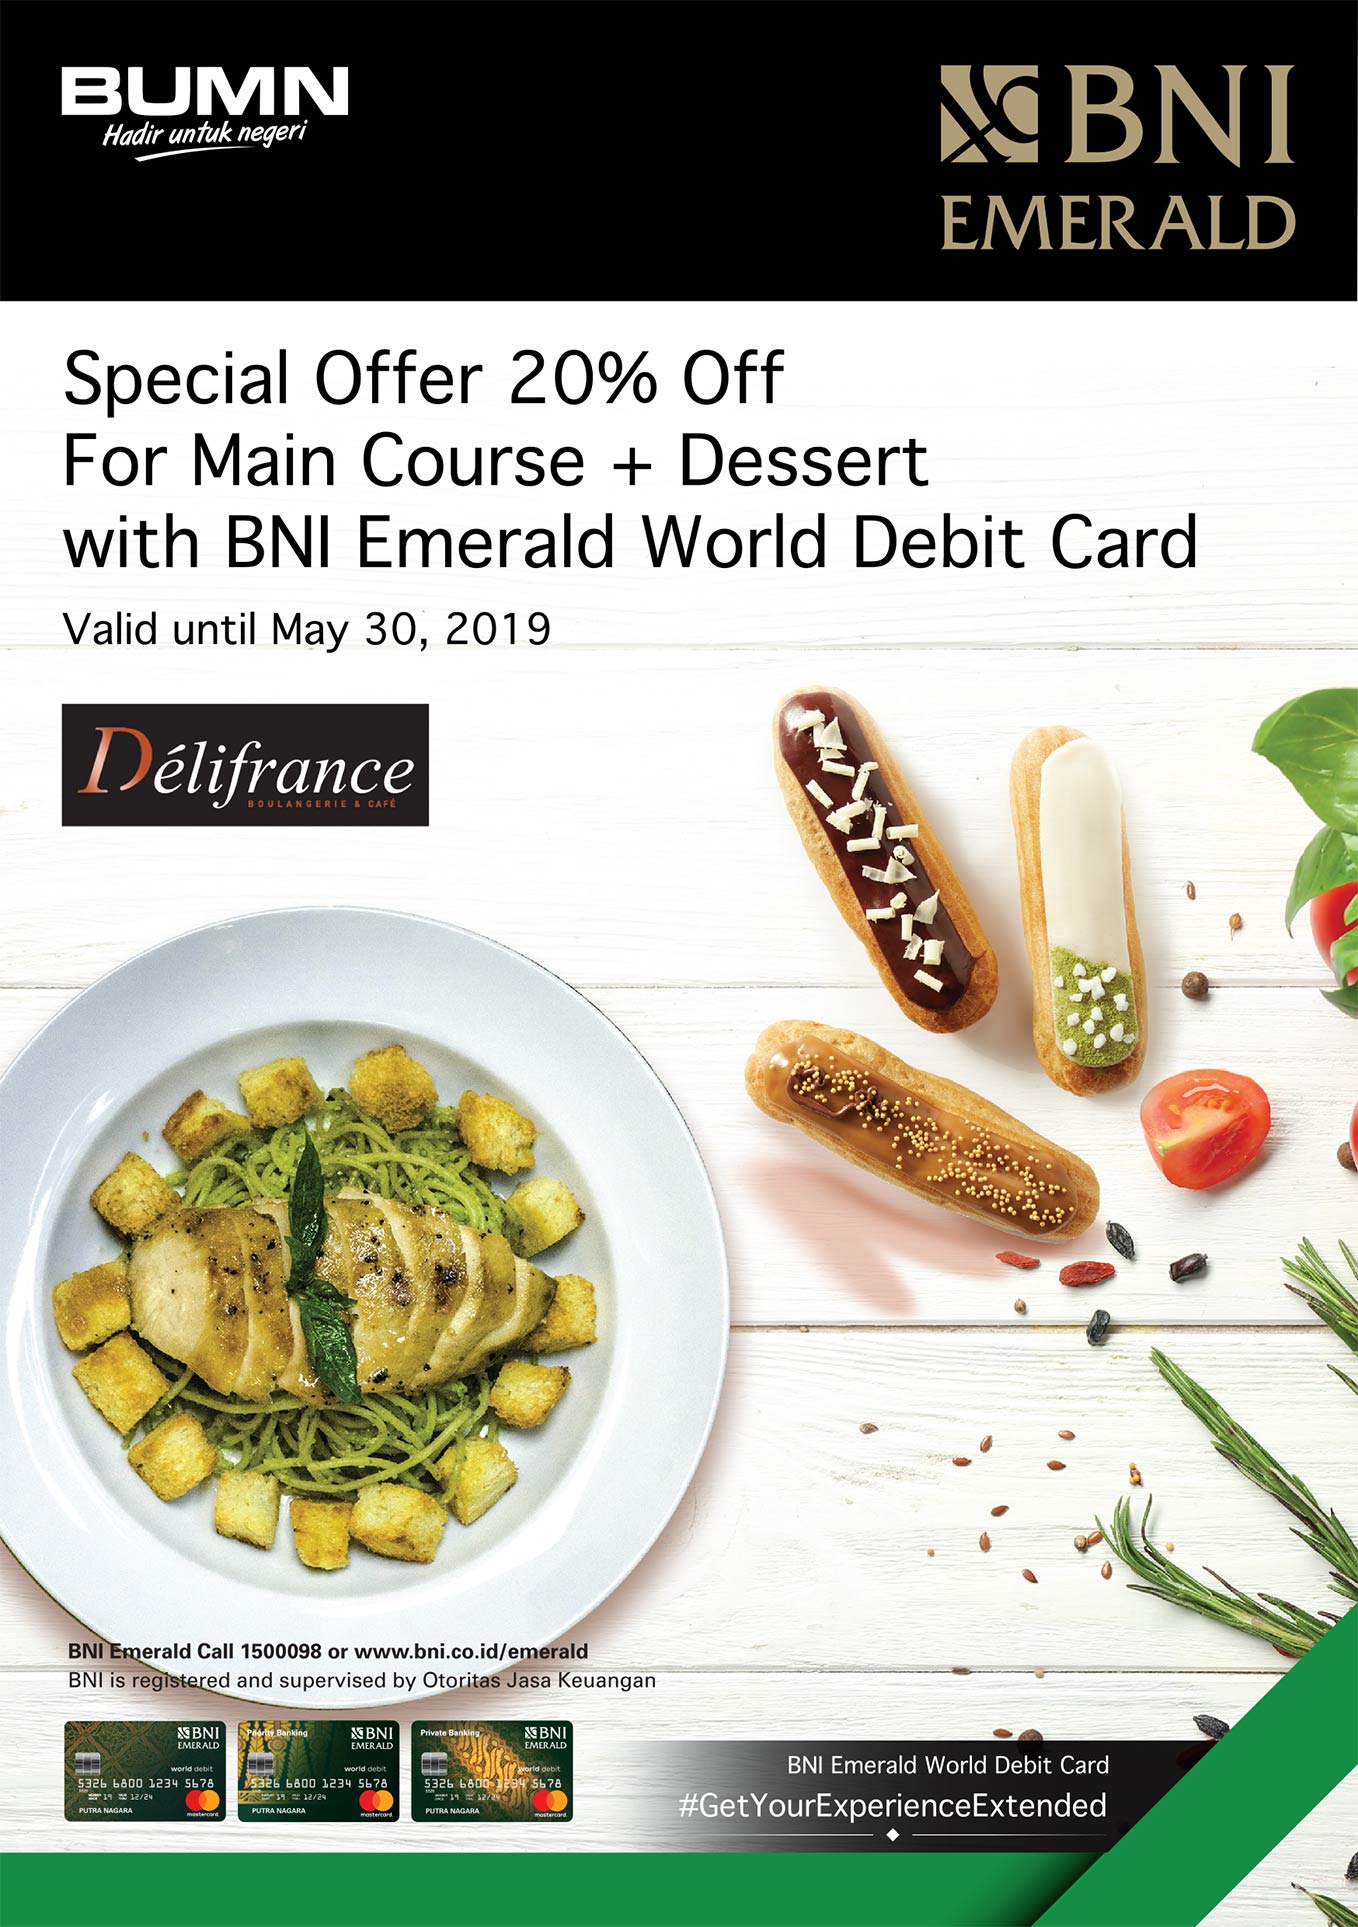 Special Offer 20% Off For Main Course + Dessert with BNI Emerald World